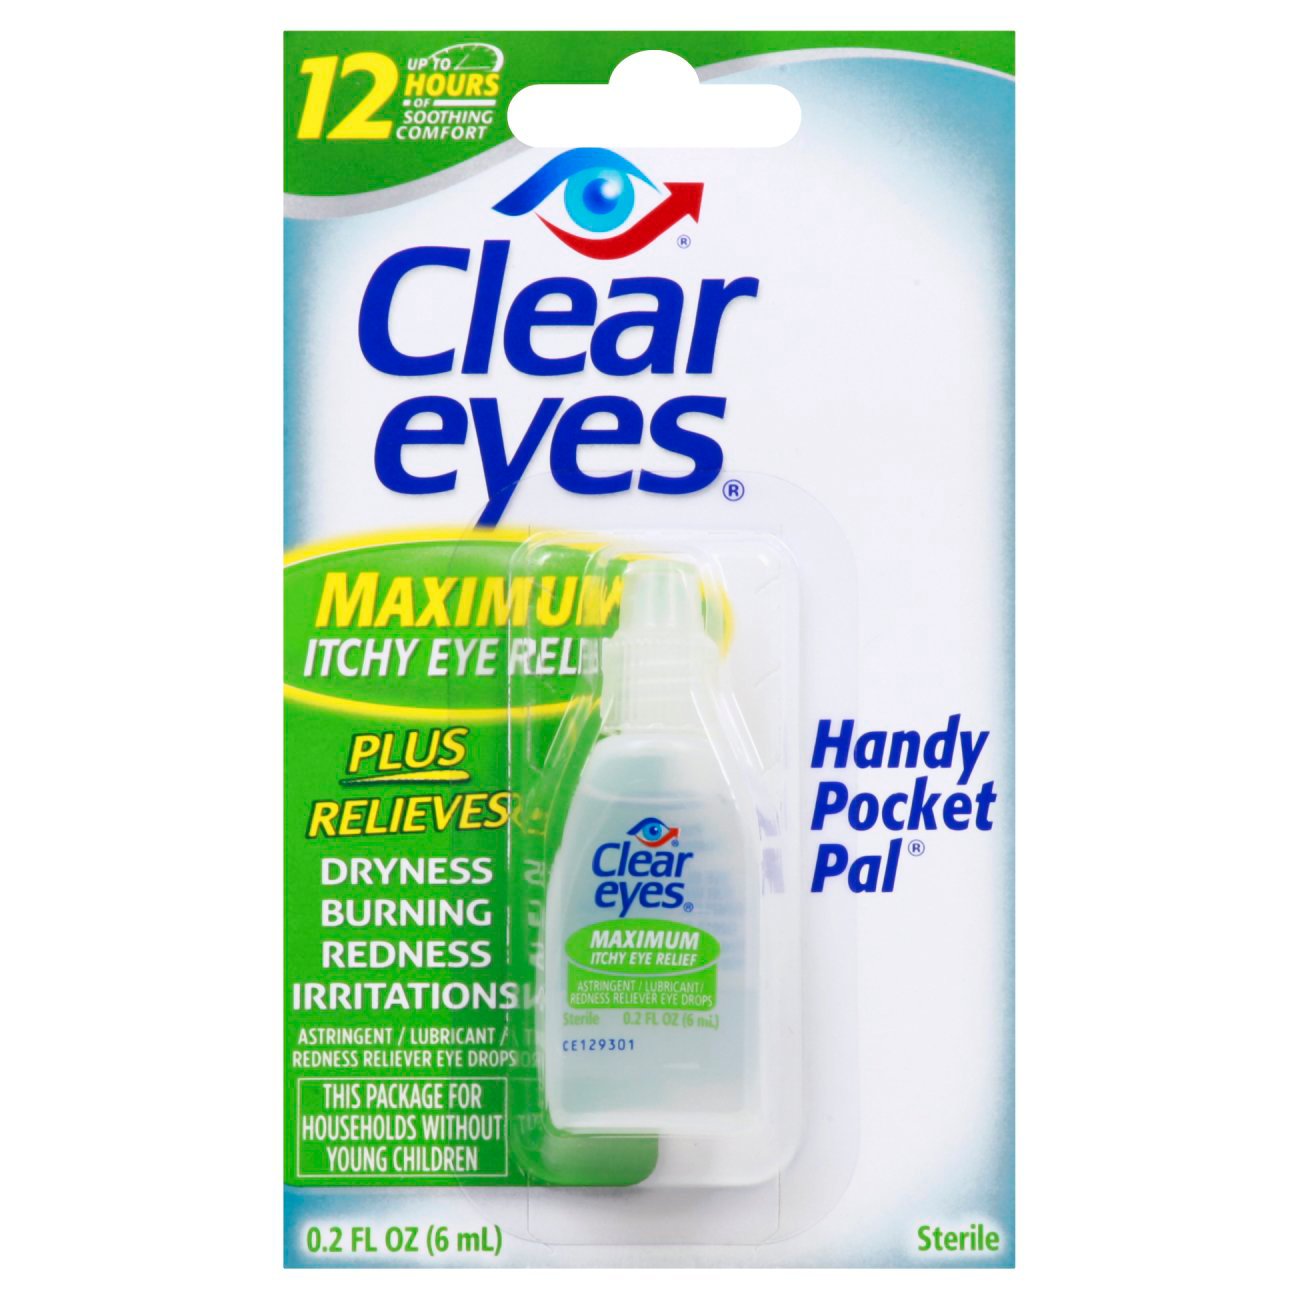 Clear eyes текст